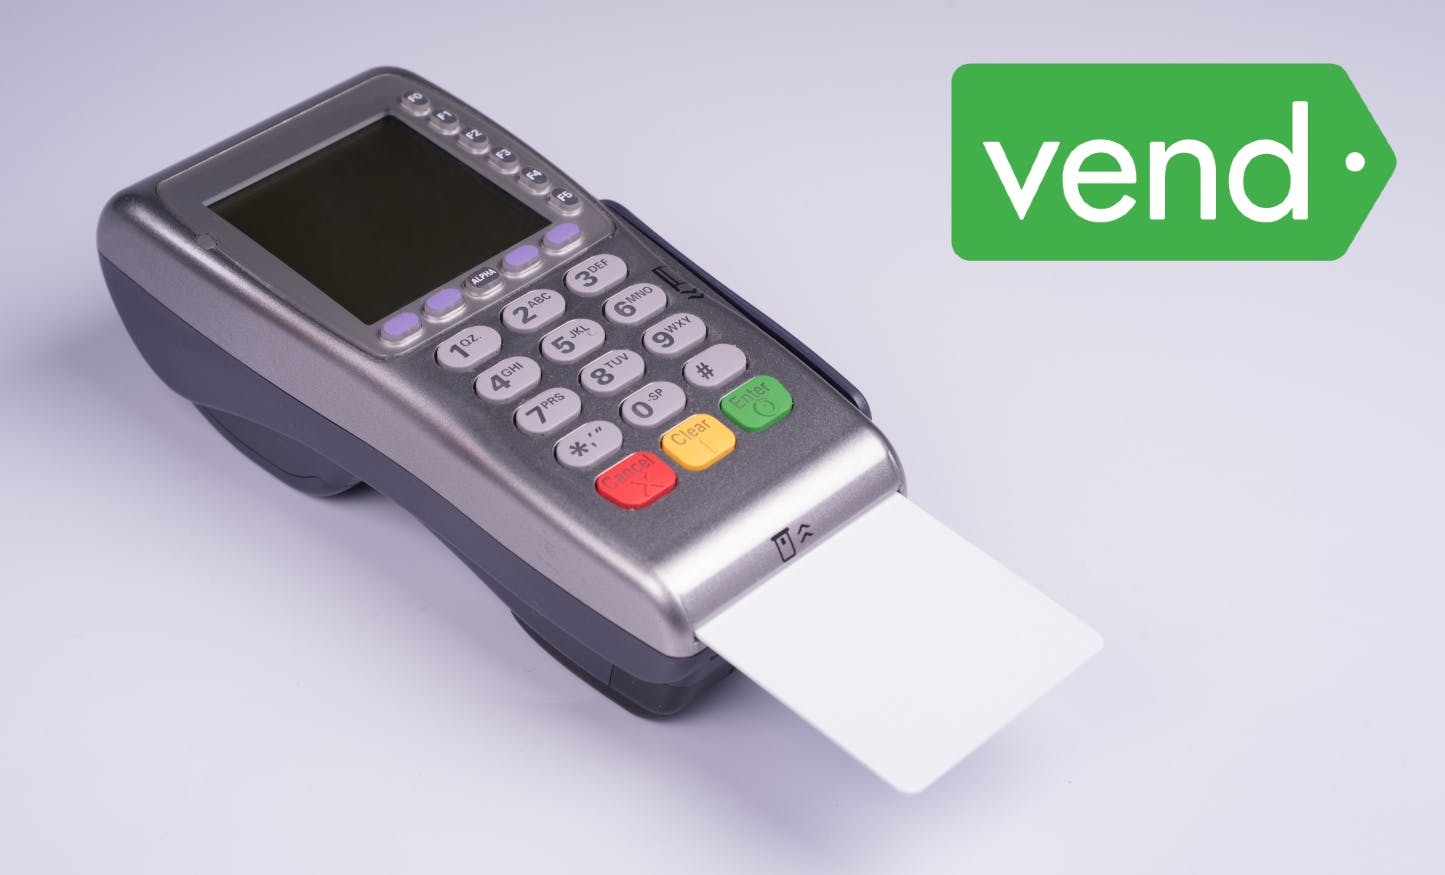 Vend POS: Review, Features, Hardware, and Prices